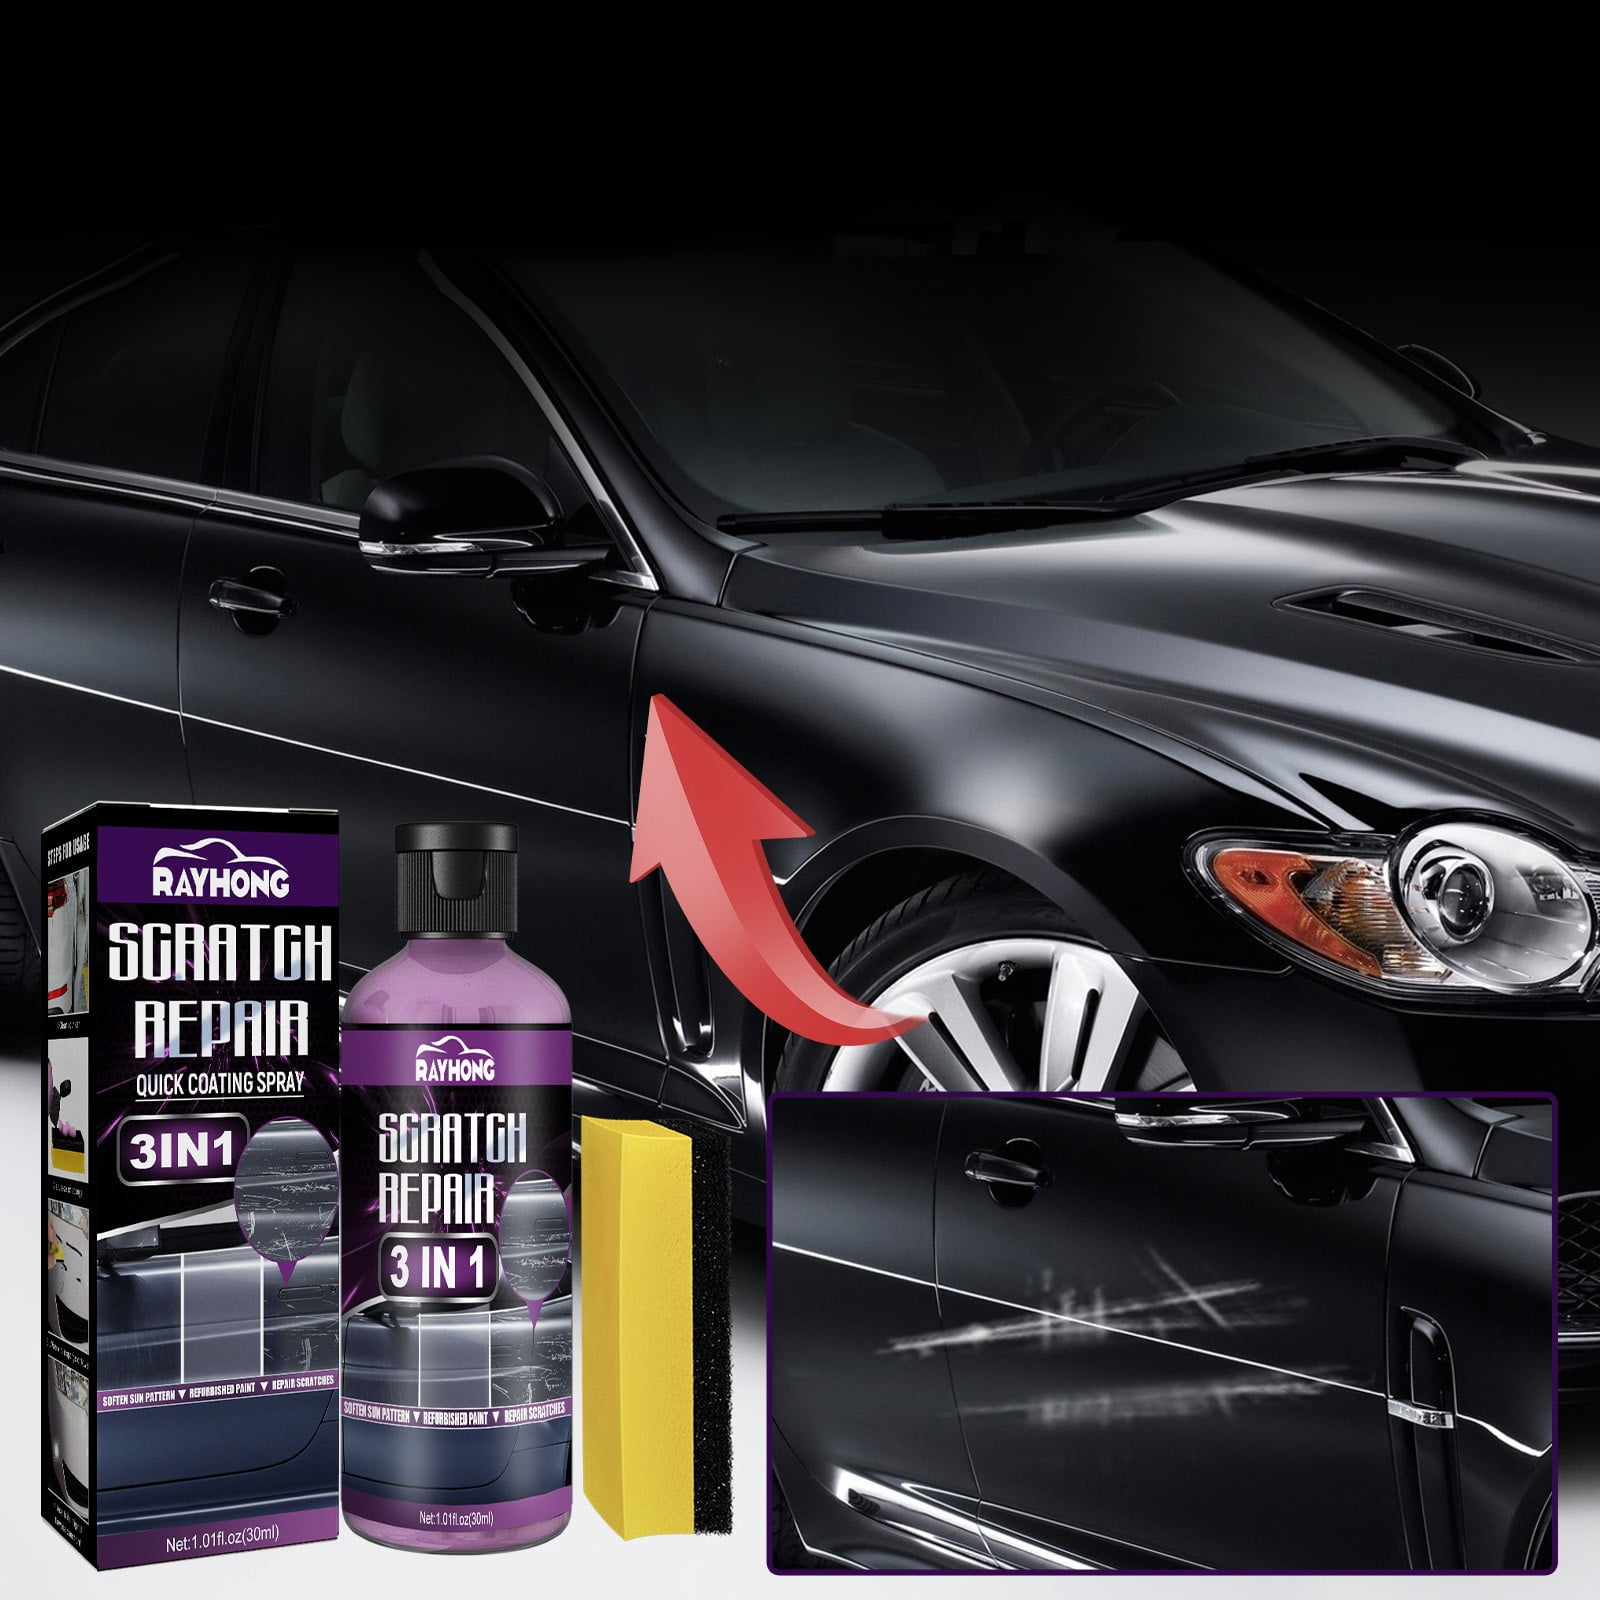 Scratch and Swirl Remover Ultimate Car Scratch Remover Polish and Paint  Restorer All in One Polishing Wax - China Four in One Fast Wax, Advanced  Liqud Compound